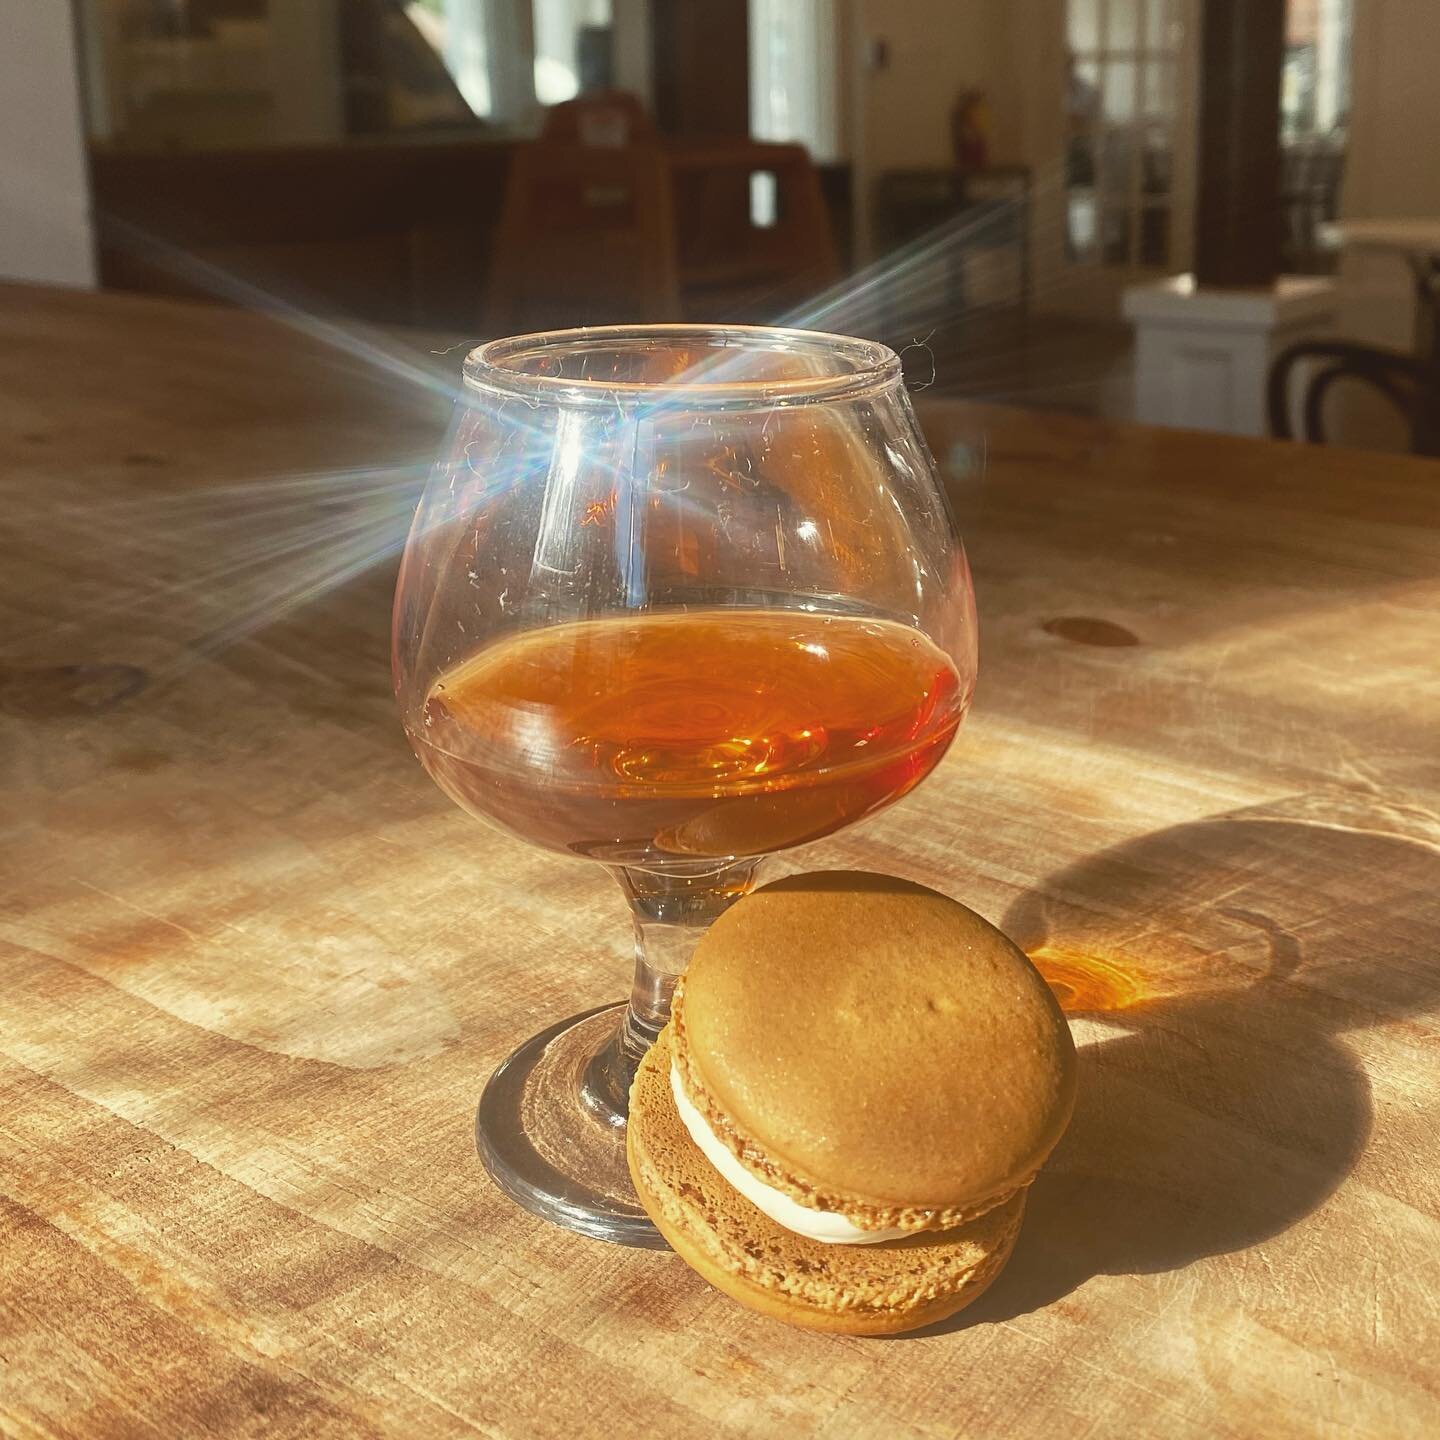 ✨CALLING ALL WHISKEY LOVERS✨
You do not want to miss out on the BOURBON MACARON

#whiskey #bourbon #Macaron #Frenchbaking #Frenchcafe #coffee #coffeeshop #baking #cocktails